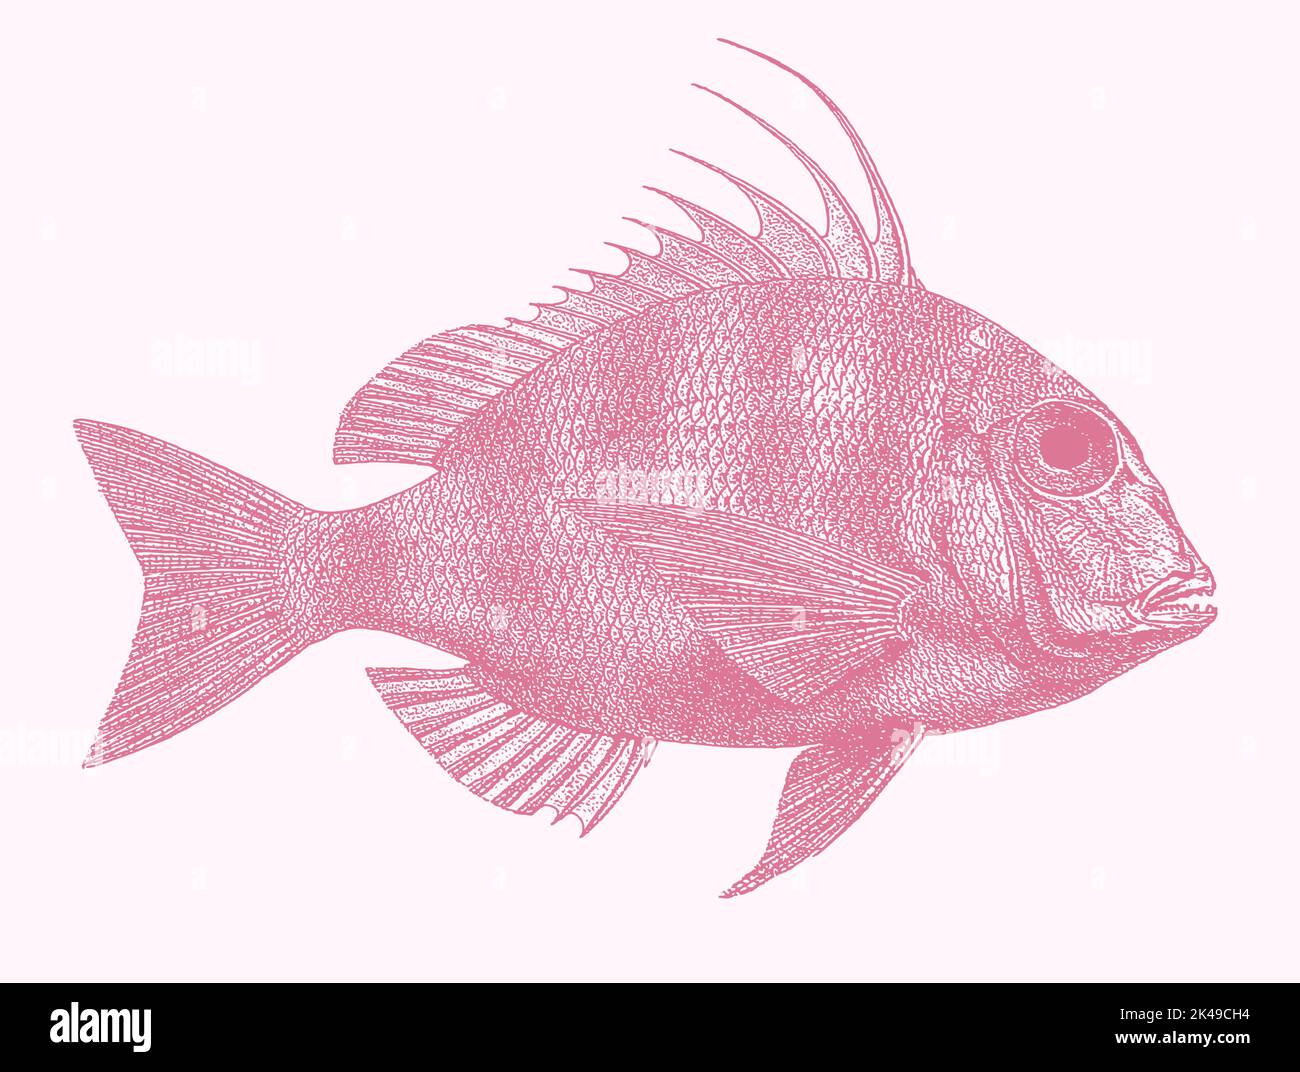 King soldierbream argyrops spinifer, marine fish in side view Stock Vector